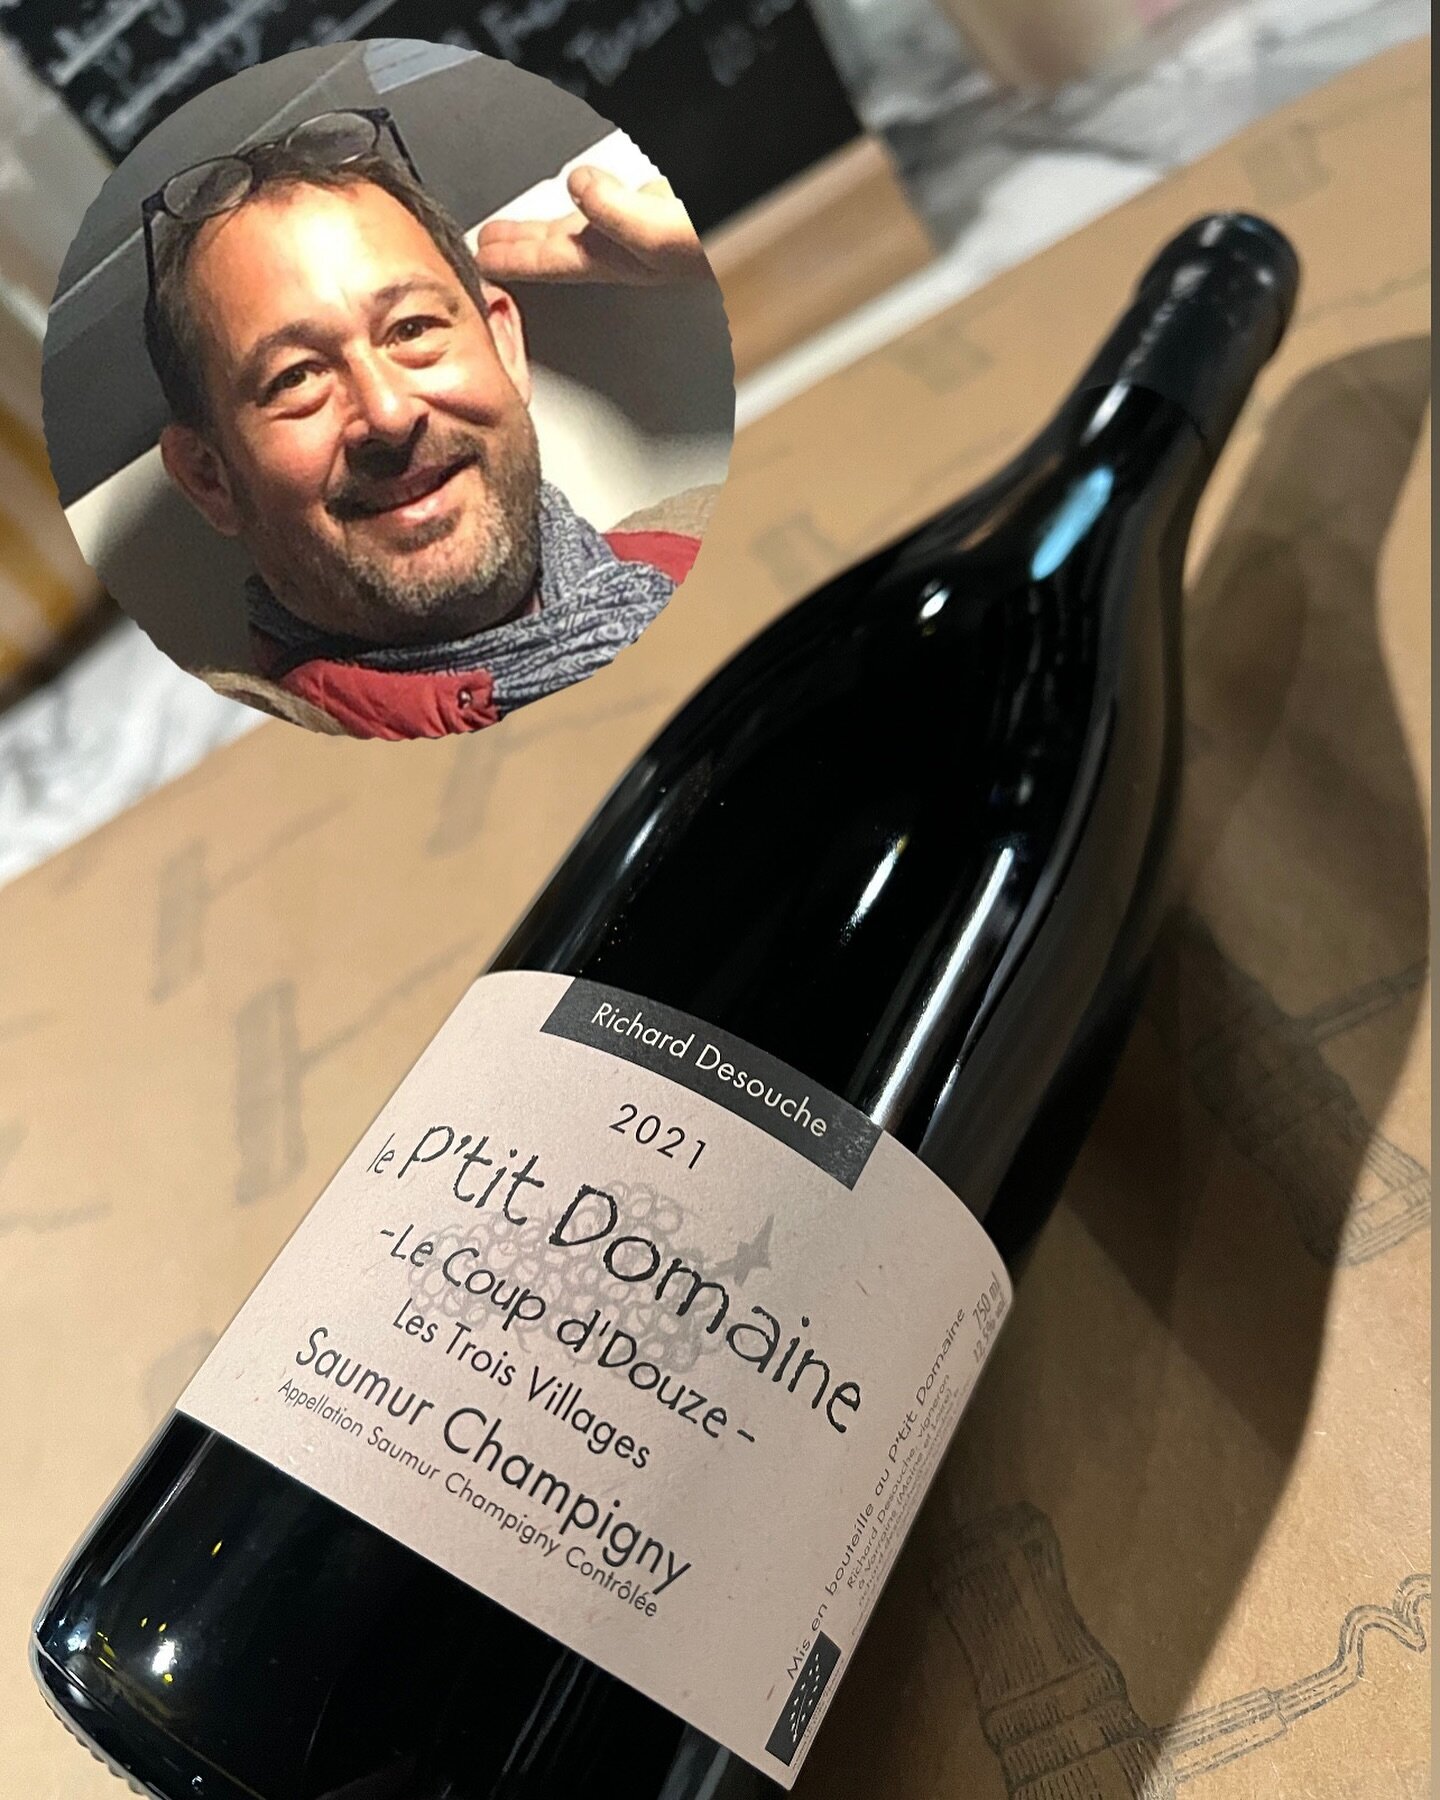 #wineoftheweek &ldquo;Well, why couldn&rsquo;t I do some wine one day&rdquo;. This is what Richard Desouche contemplated after a Rugby match with other winemakers in Saumur. Fed up with his current job, he decided to open a winery to embrace the mult